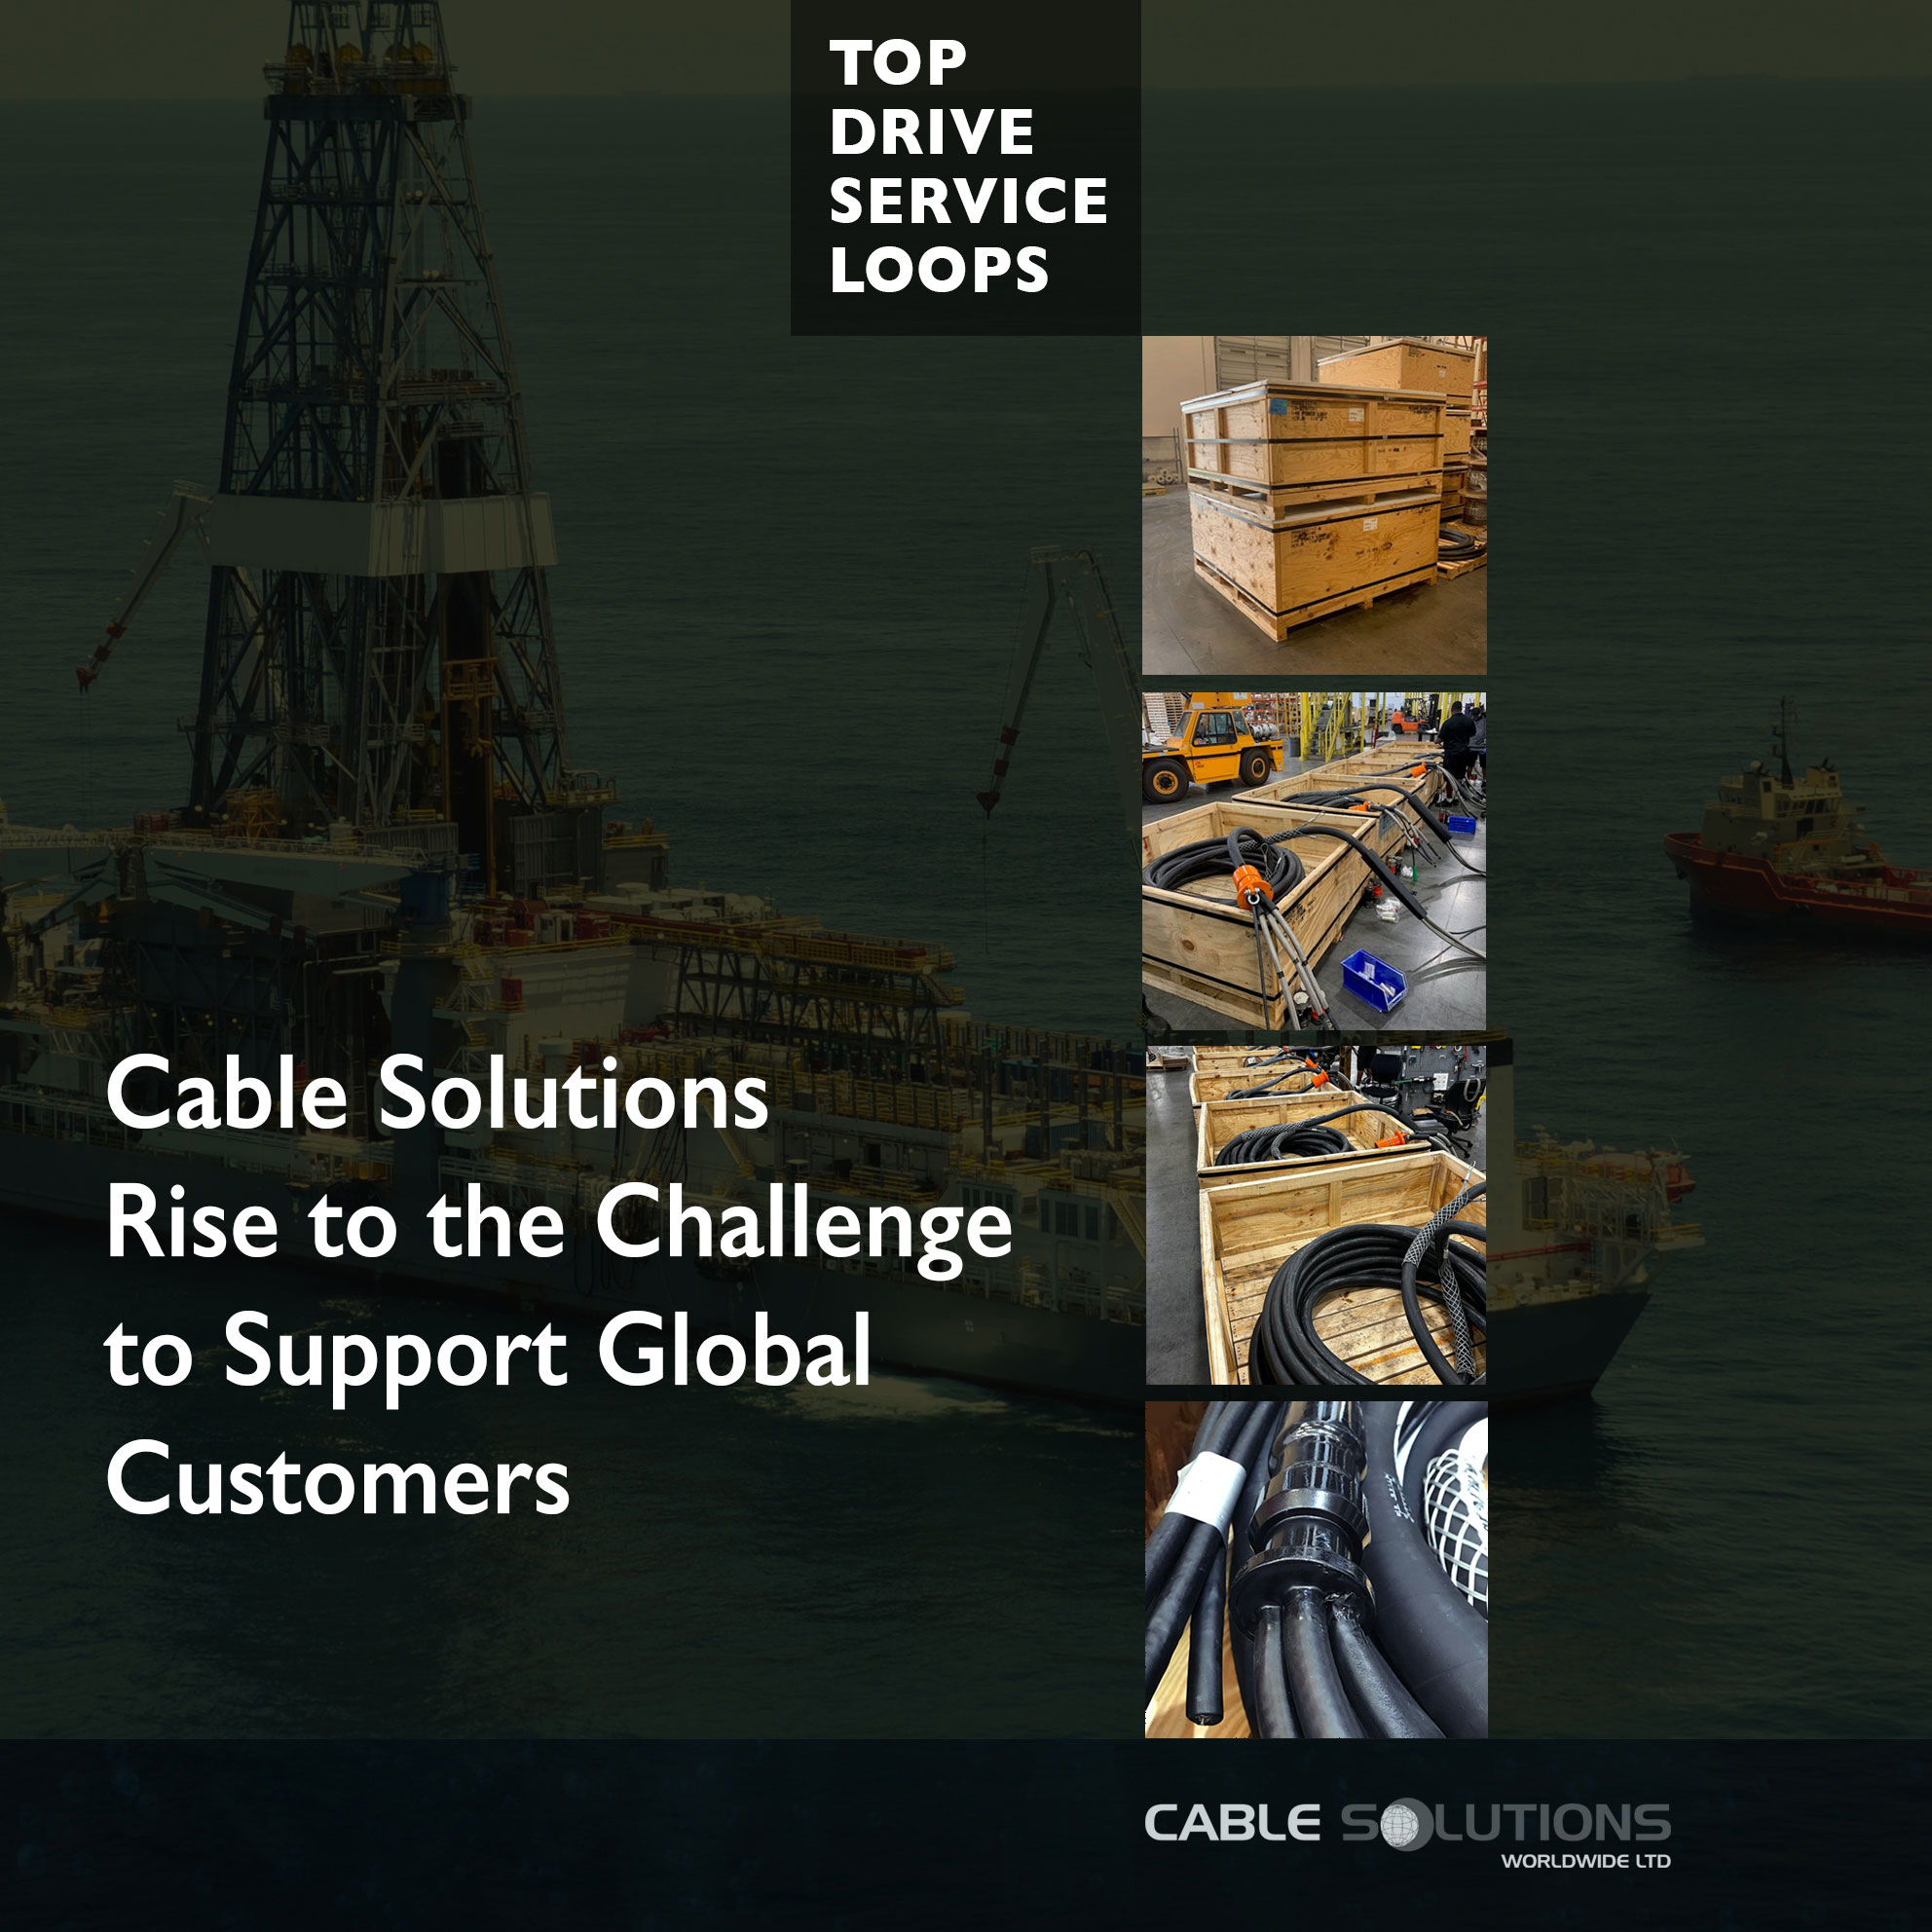 Cable Solutions rise to the challenge